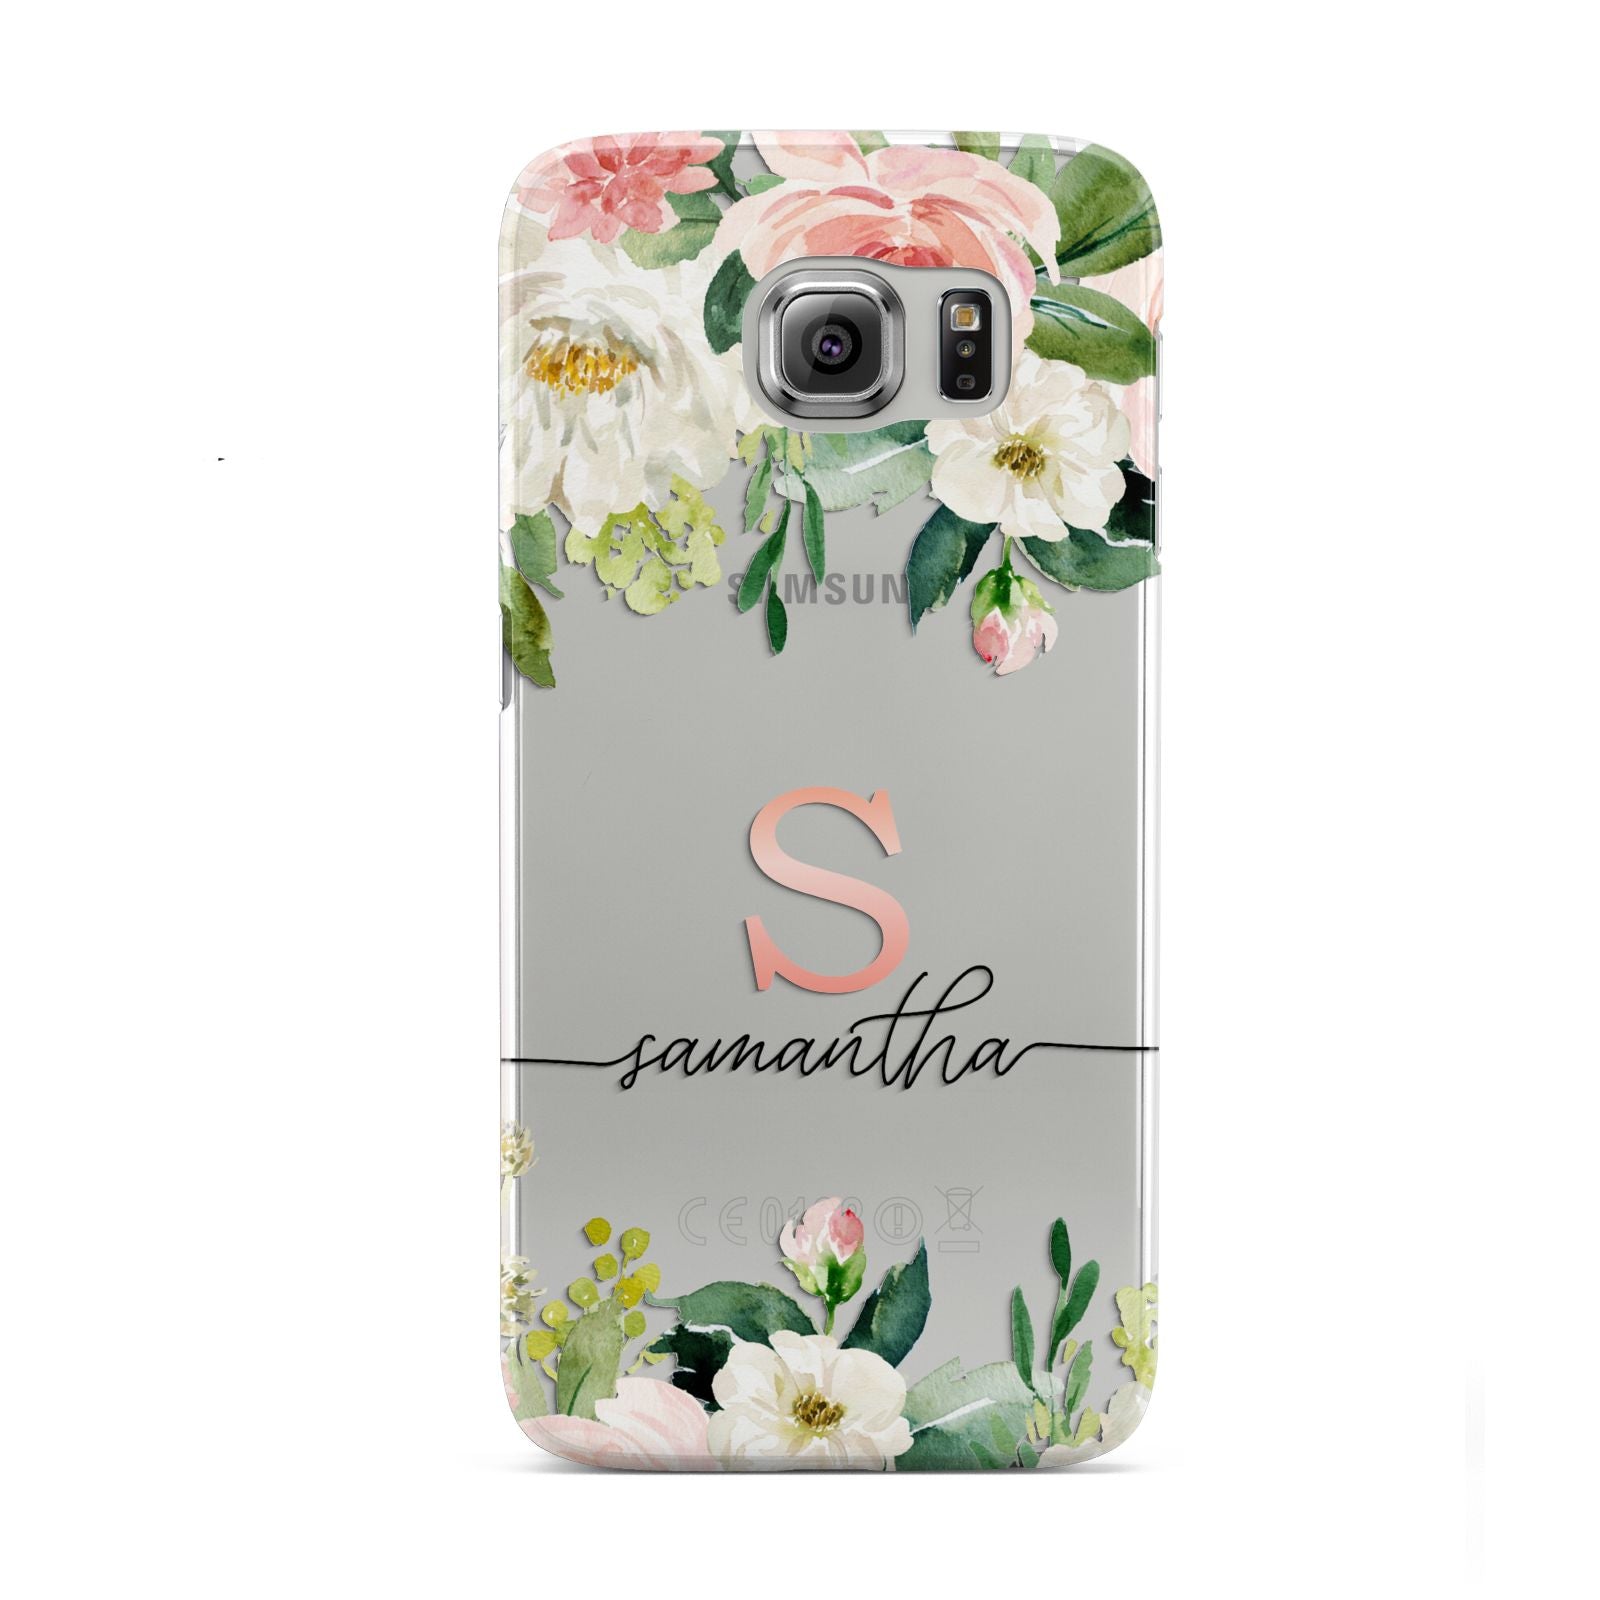 Monogrammed Floral Roses Samsung Galaxy S6 Case